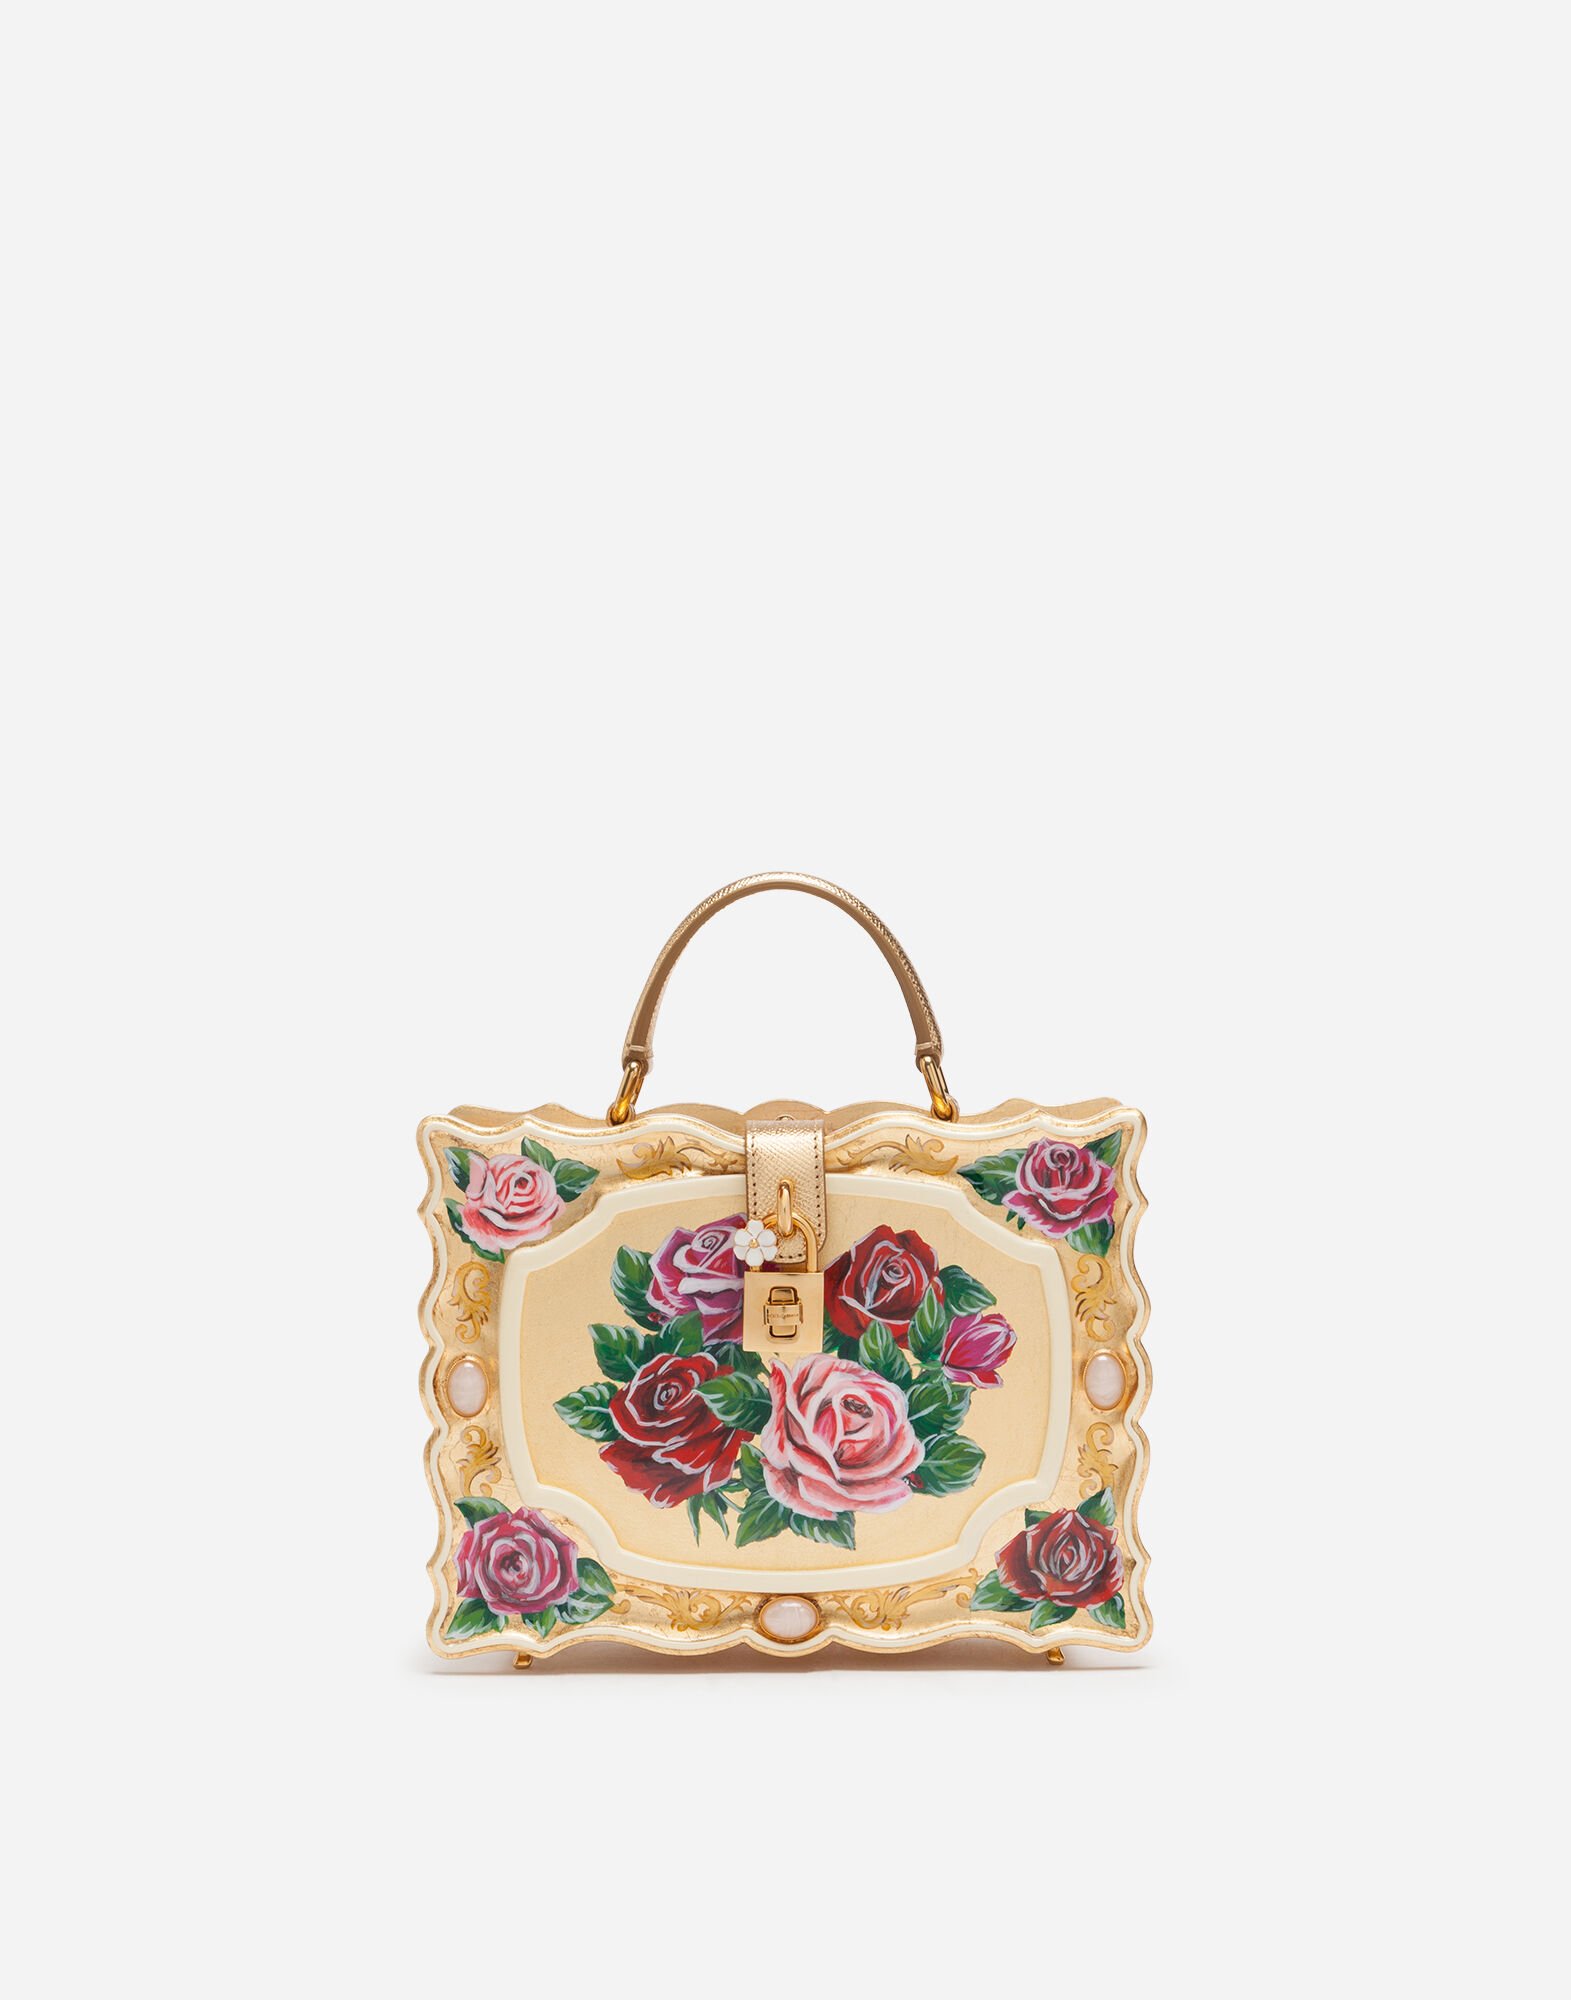 Dolce&Gabbana Dolce Box bag in golden hand-painted wood Gold BB7567AY828